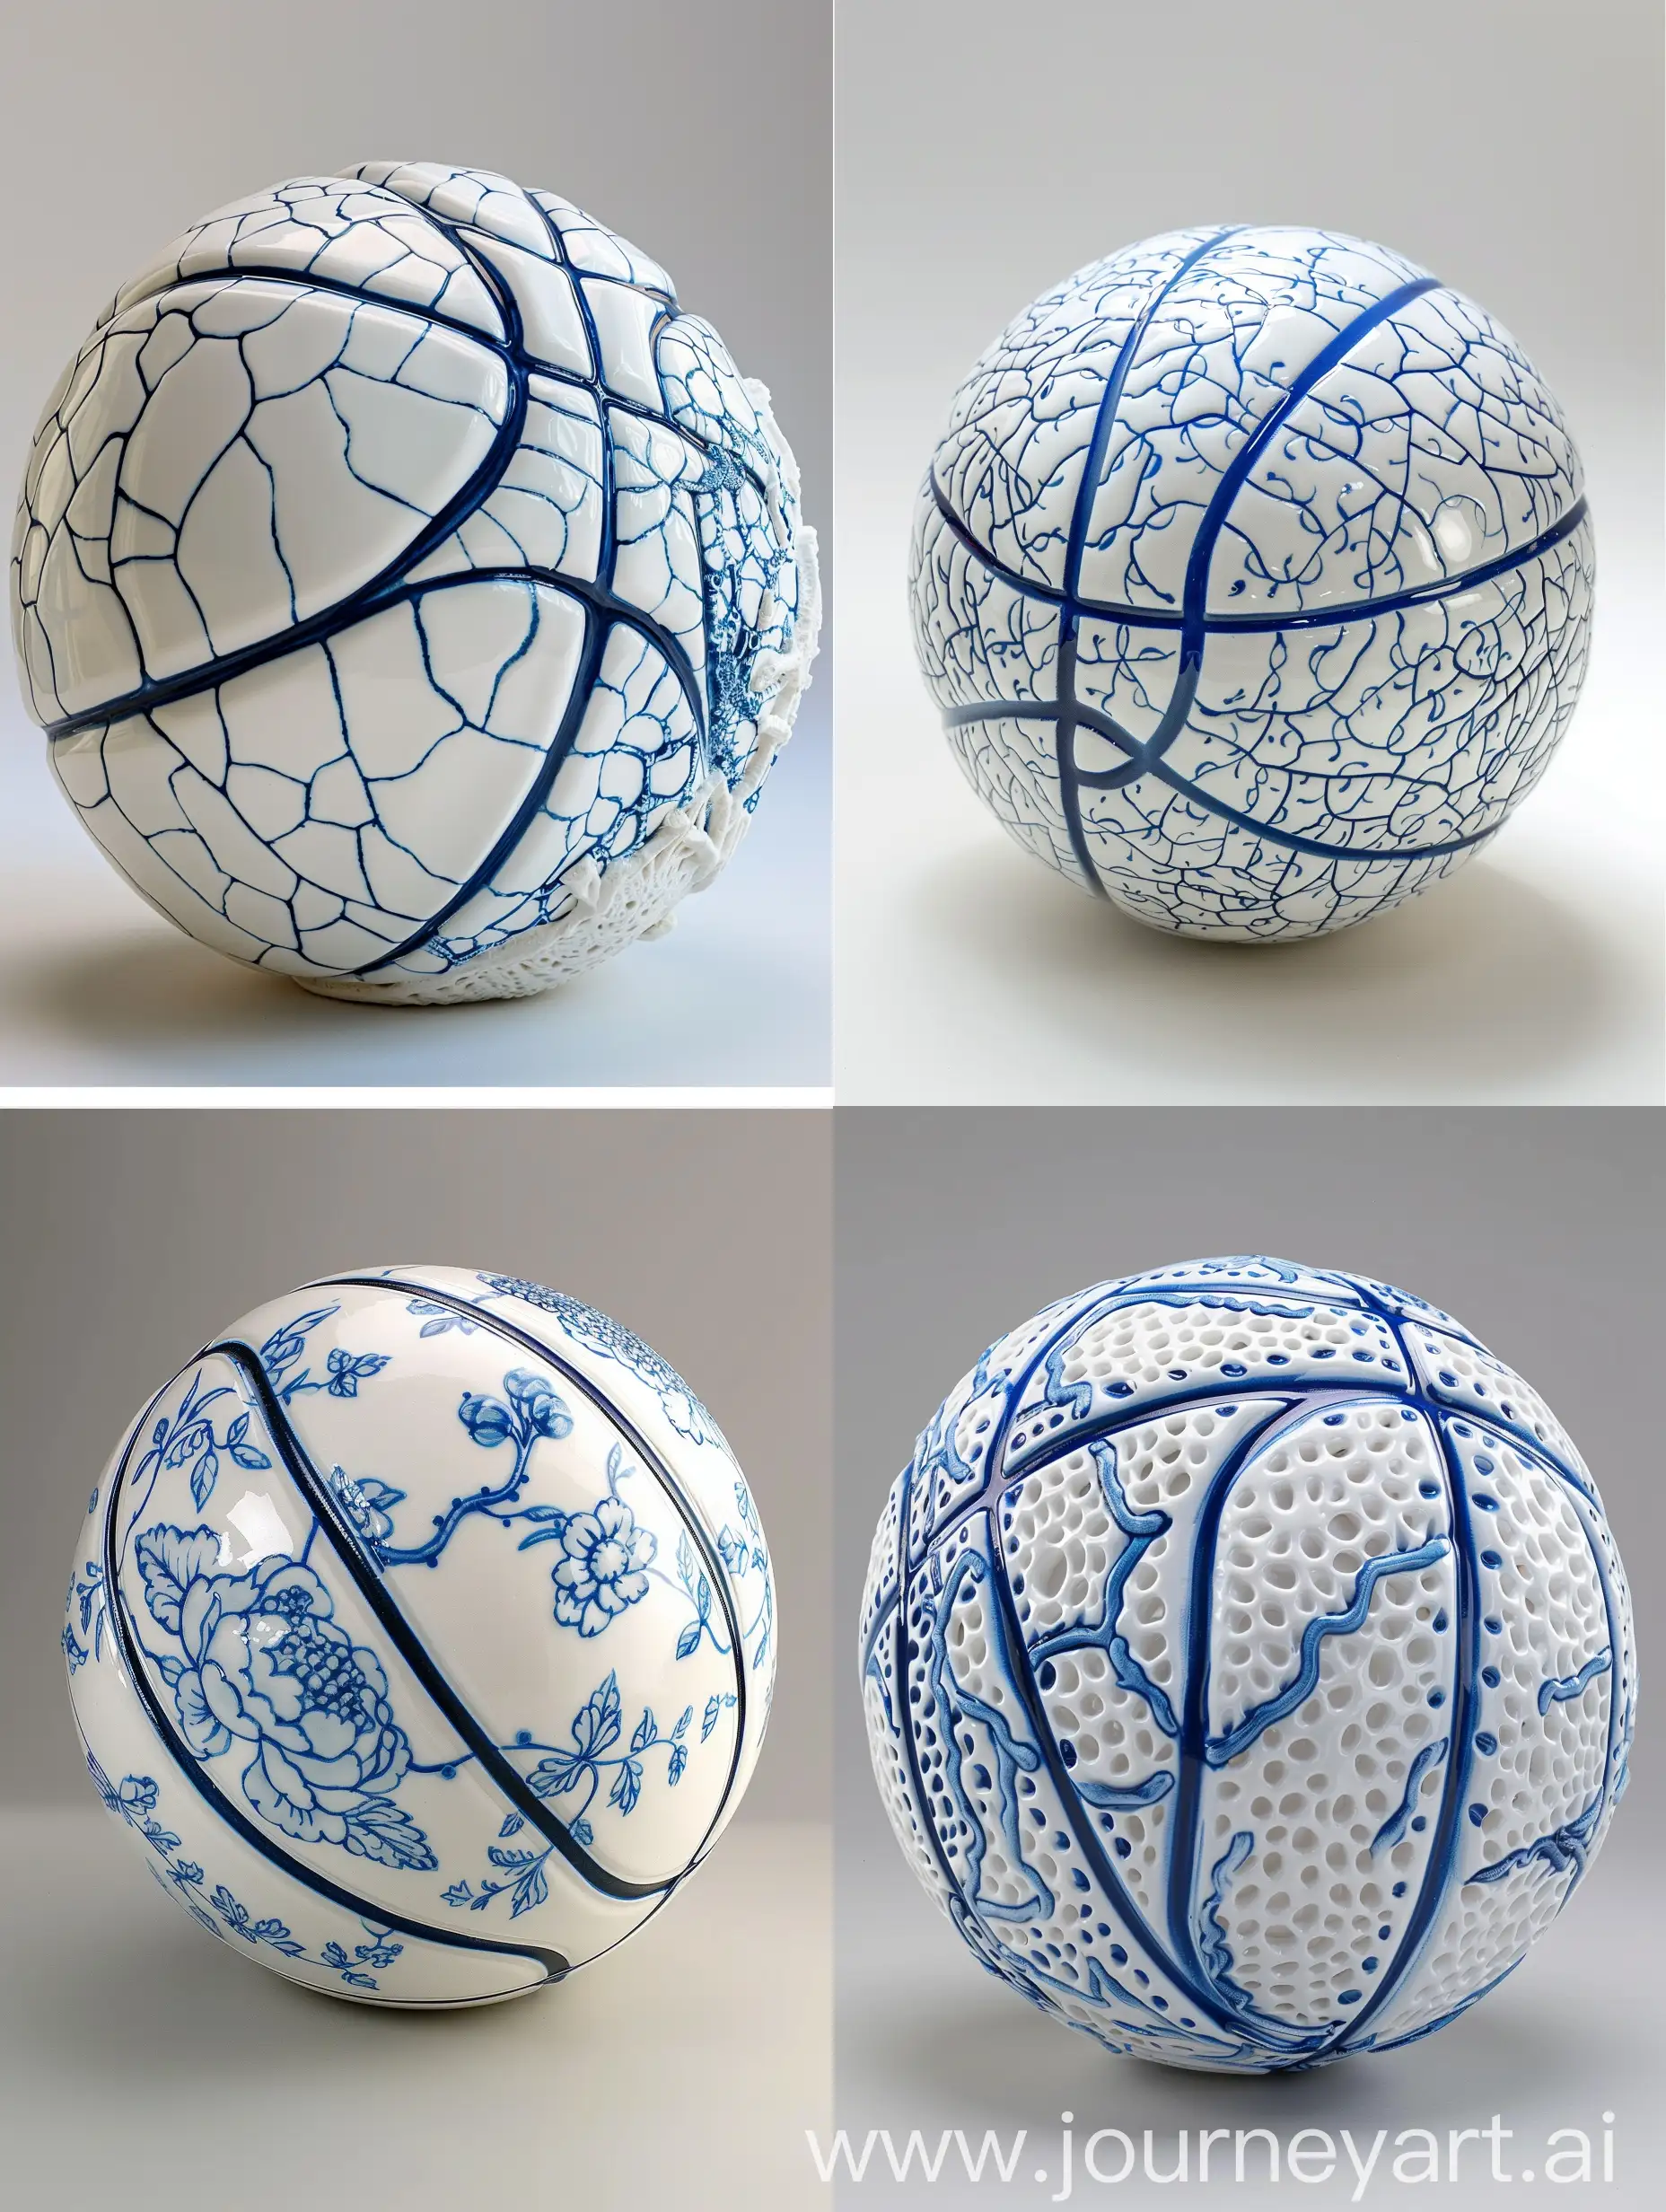 Hyper-Realistic-Porcelain-Imari-Ware-Style-Basketball-in-Intricate-White-and-Blue-Design